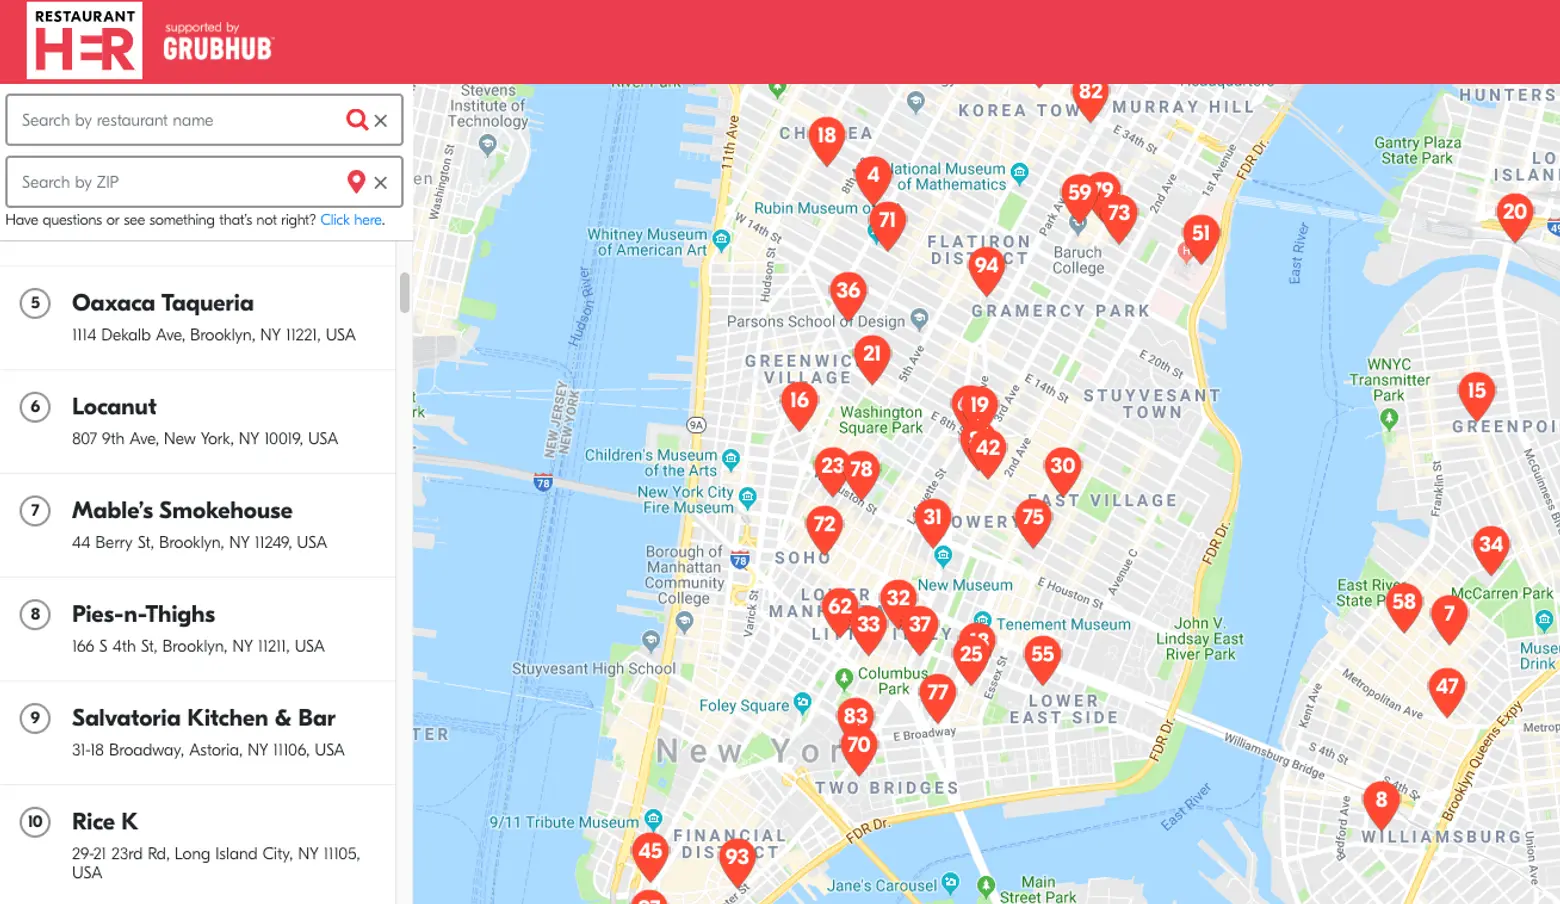 Grubhub maps all of the restaurants in NYC run by women